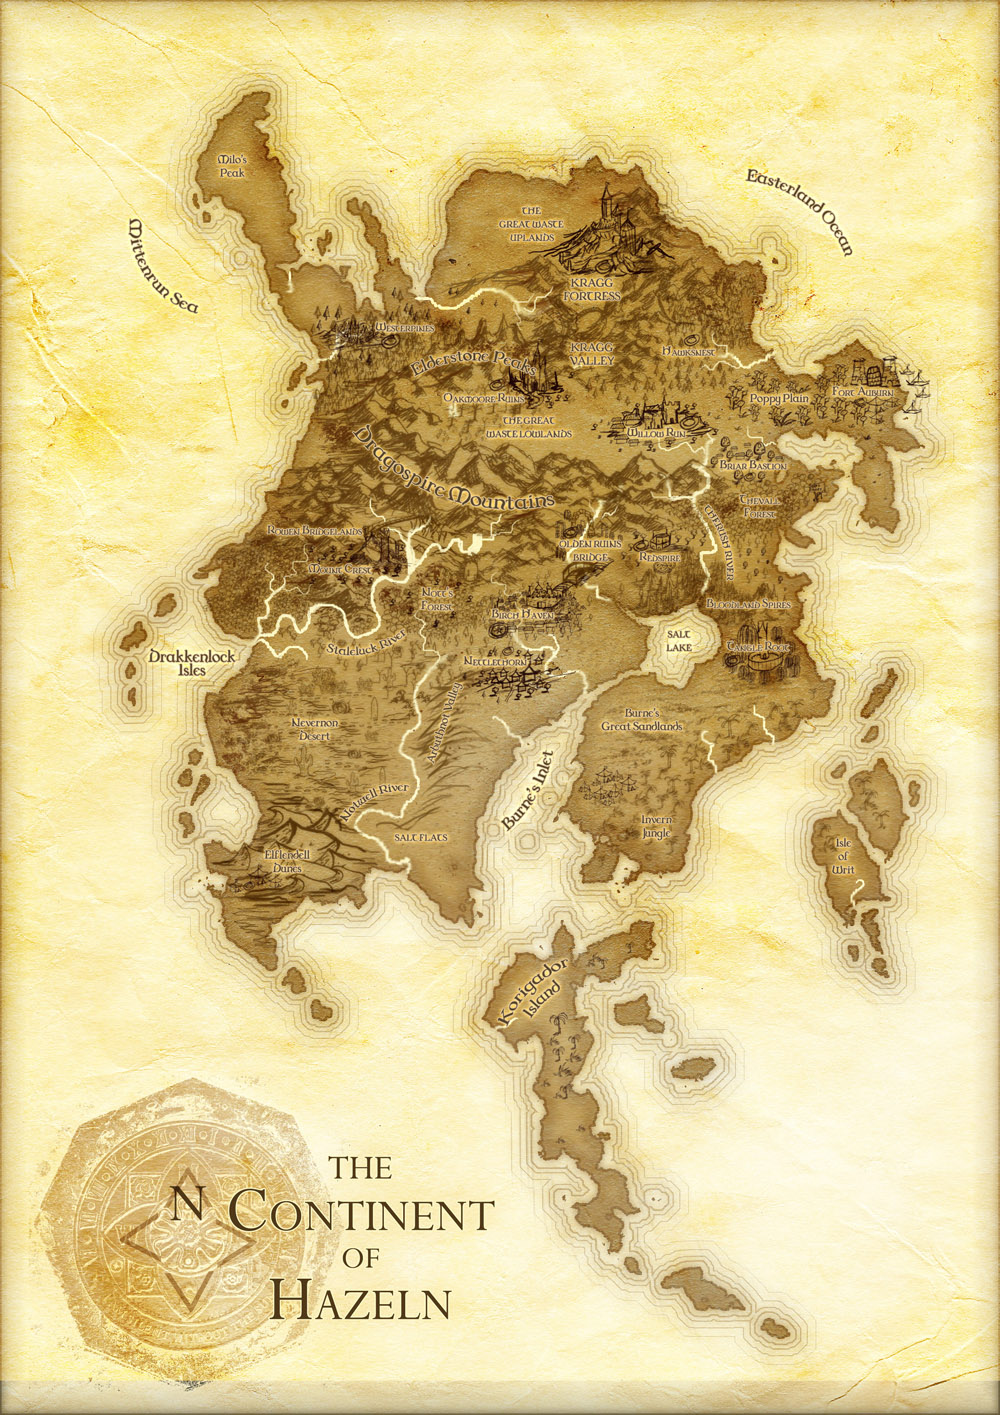 Fantasy parchment single continent with islands Lord of the Rings Game of Thrones style fantasy map